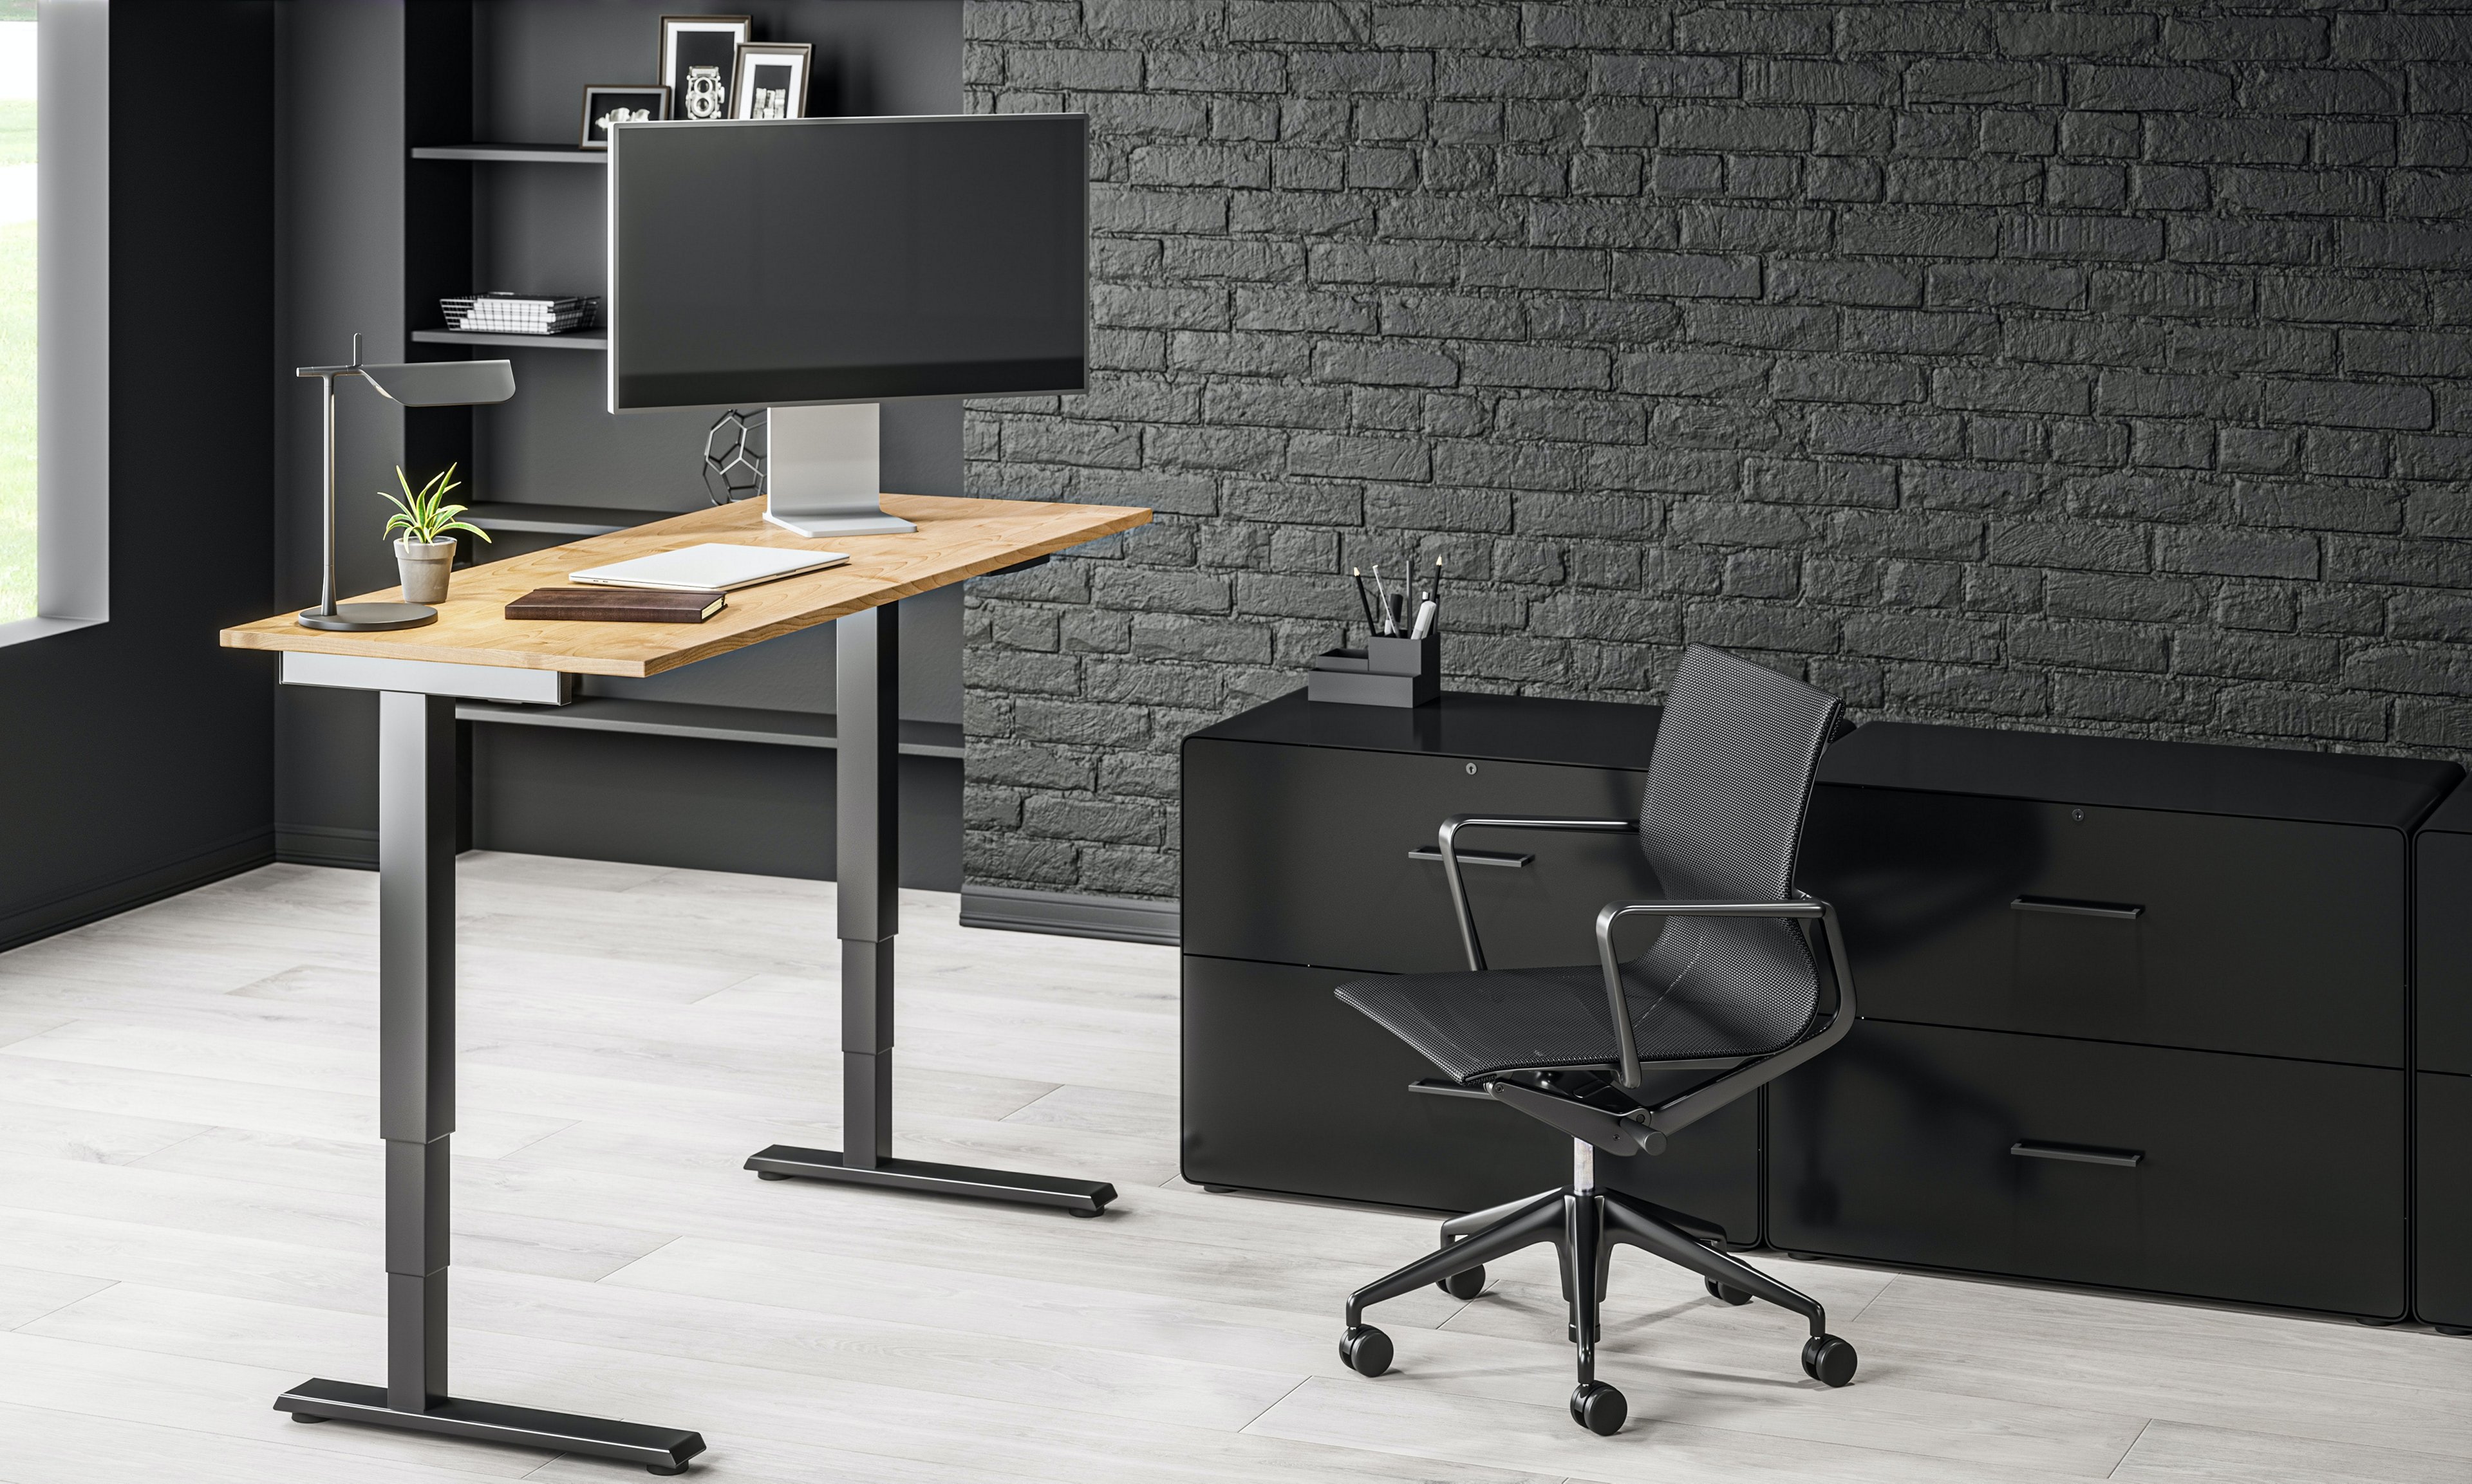 An ergonomic chair provides support for your back and neck.